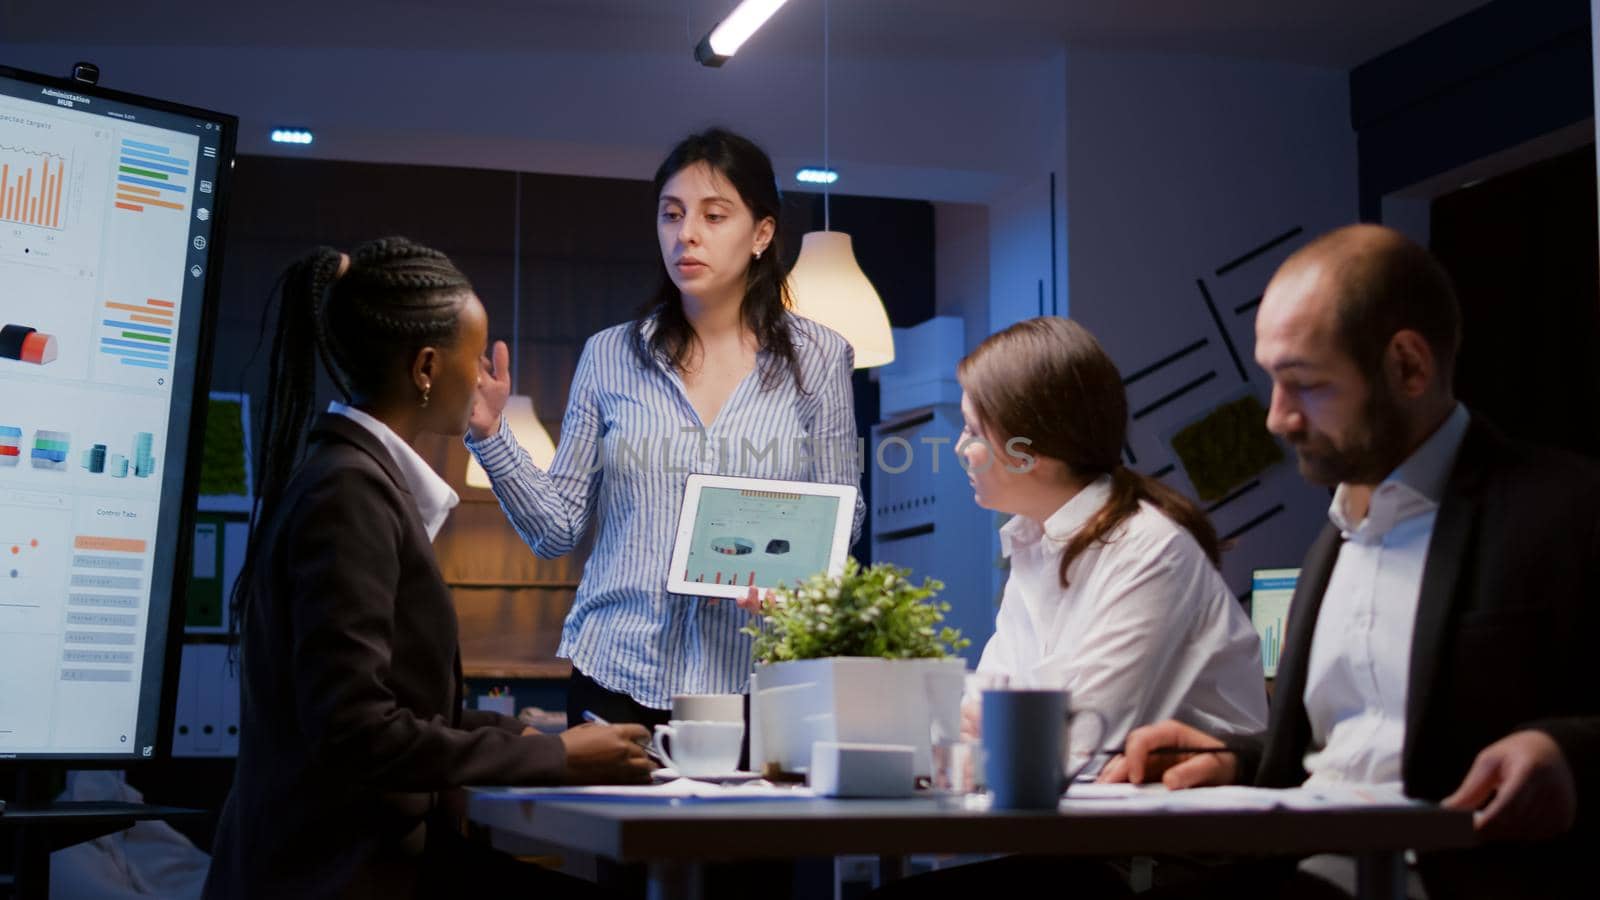 Overworked workaholic entrepreneur woman shwoing marketing graphs using tablet overworking at company solution late at night in meeting room. Diverse multi-ethnic teamwork solving financial strategy